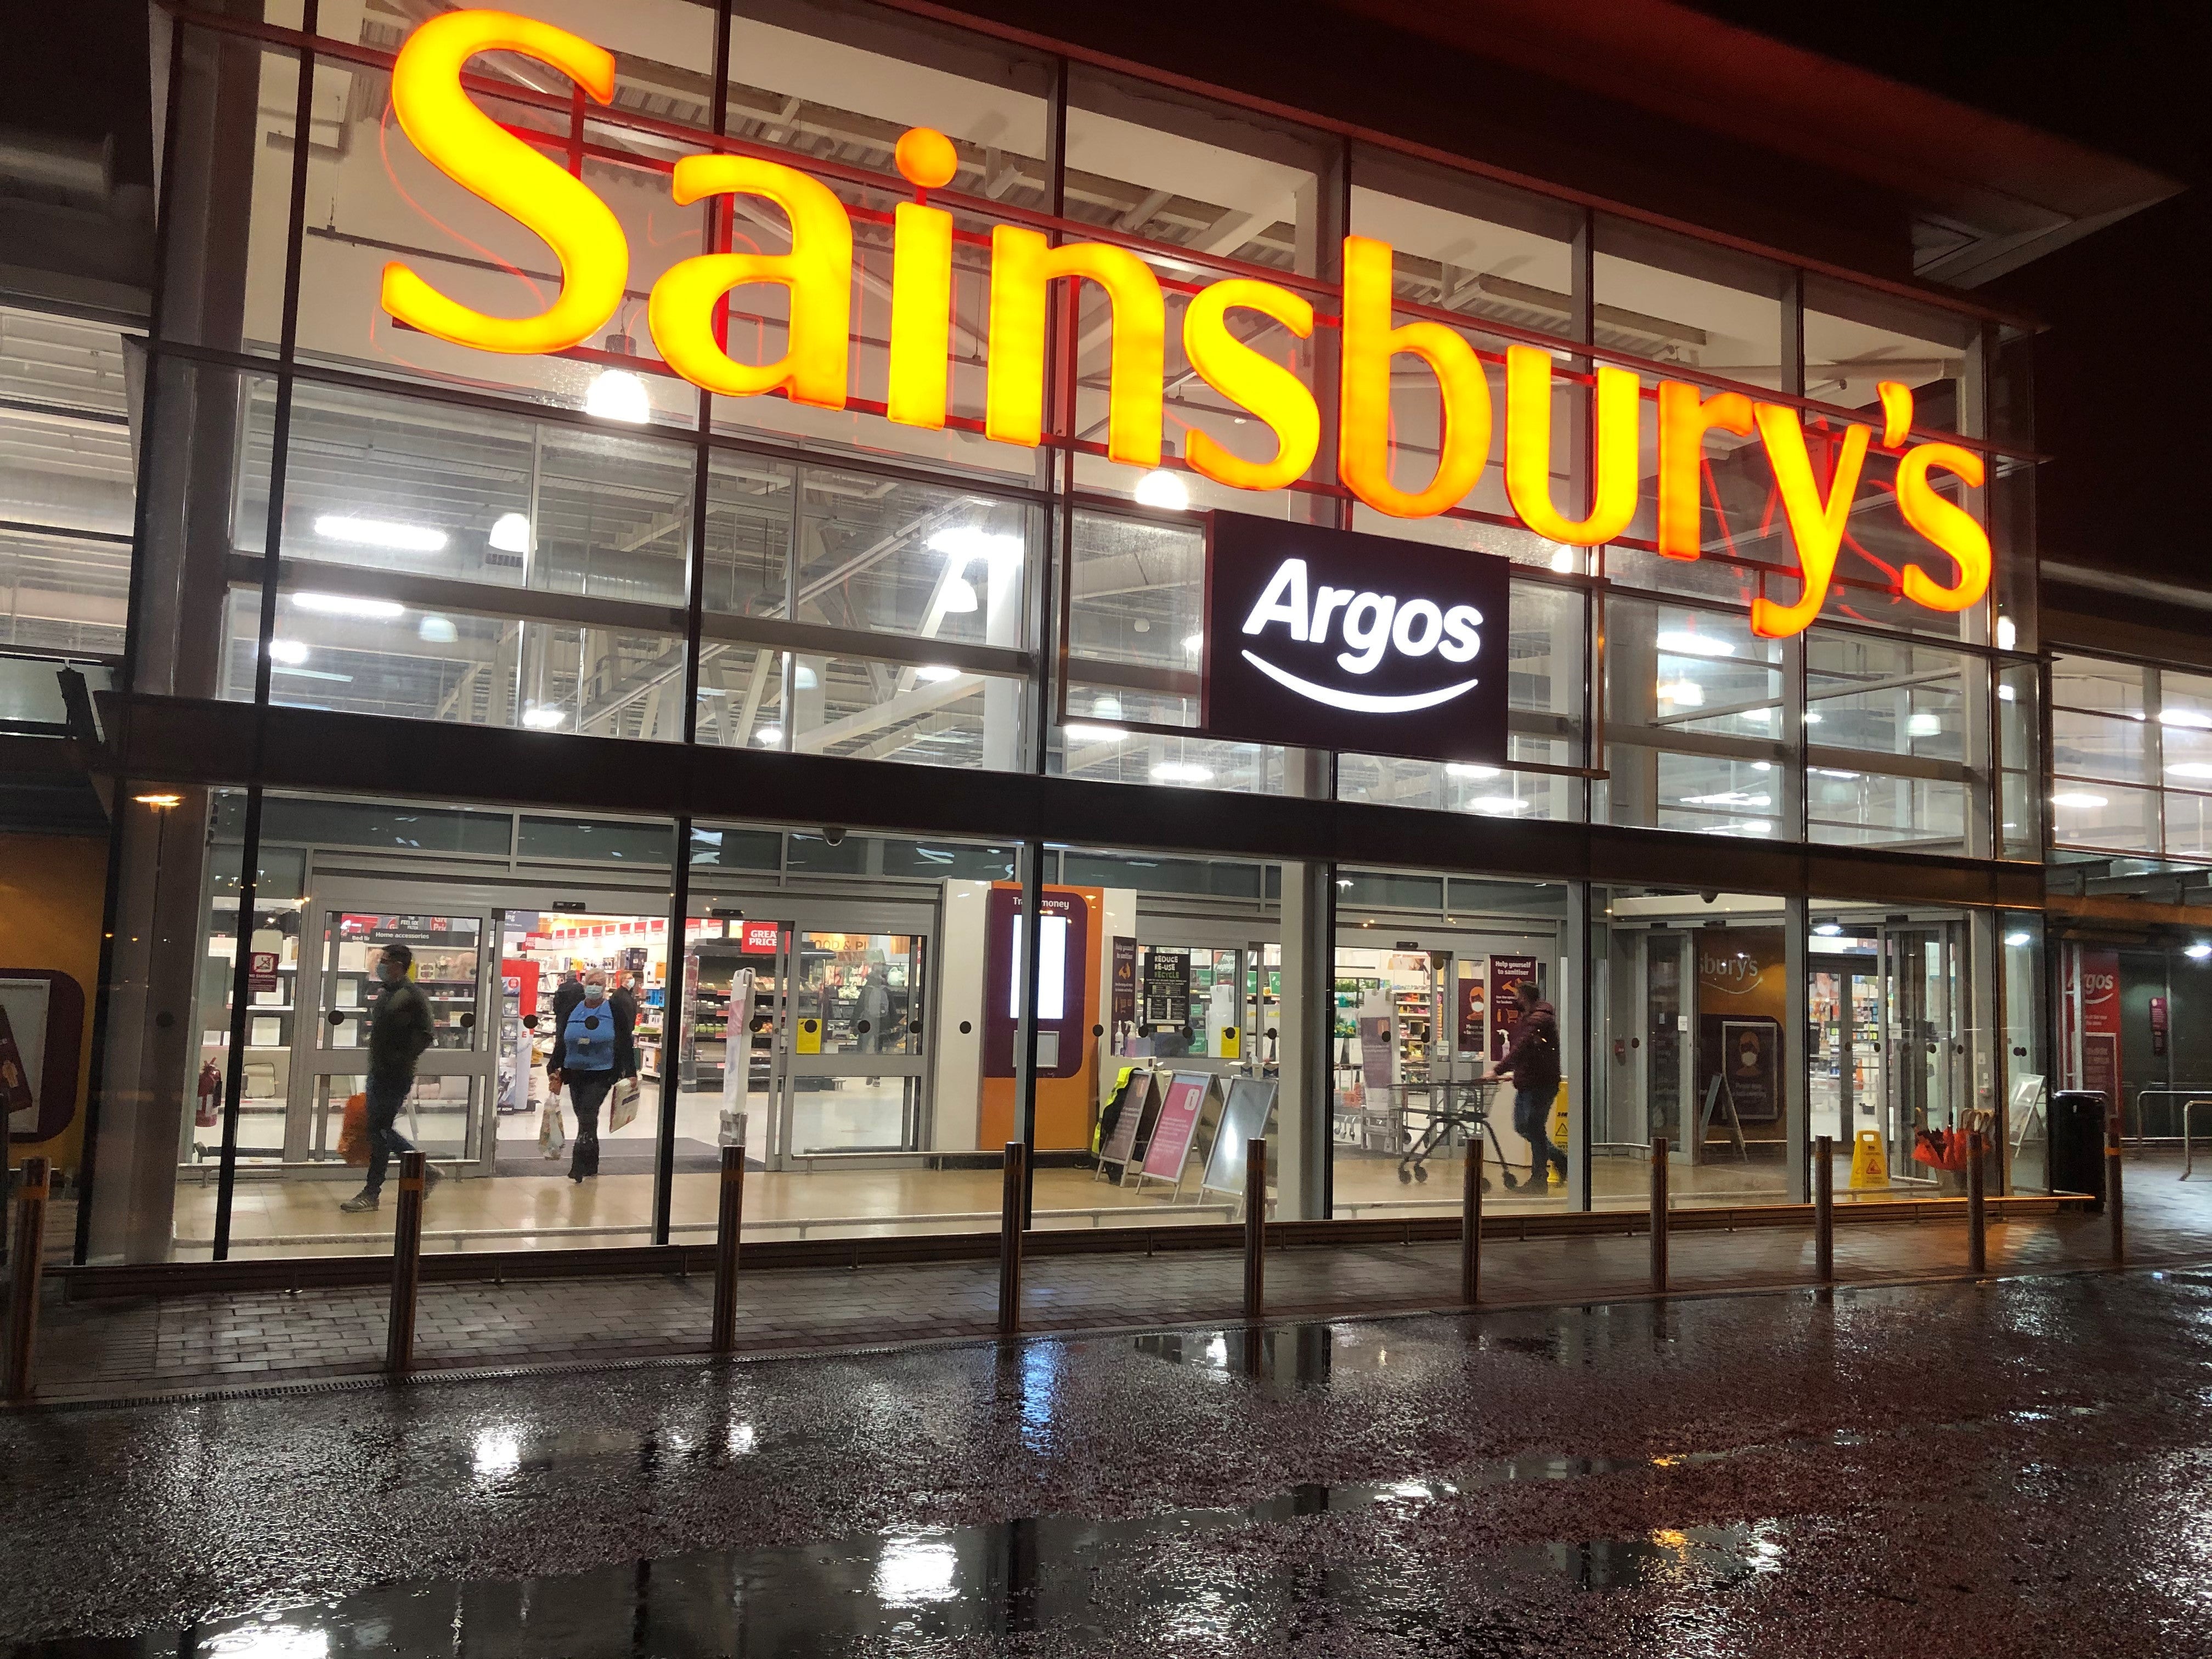 Sainsbury’s is increasing pay as part of a £25 million package (Michael McHugh/PA)